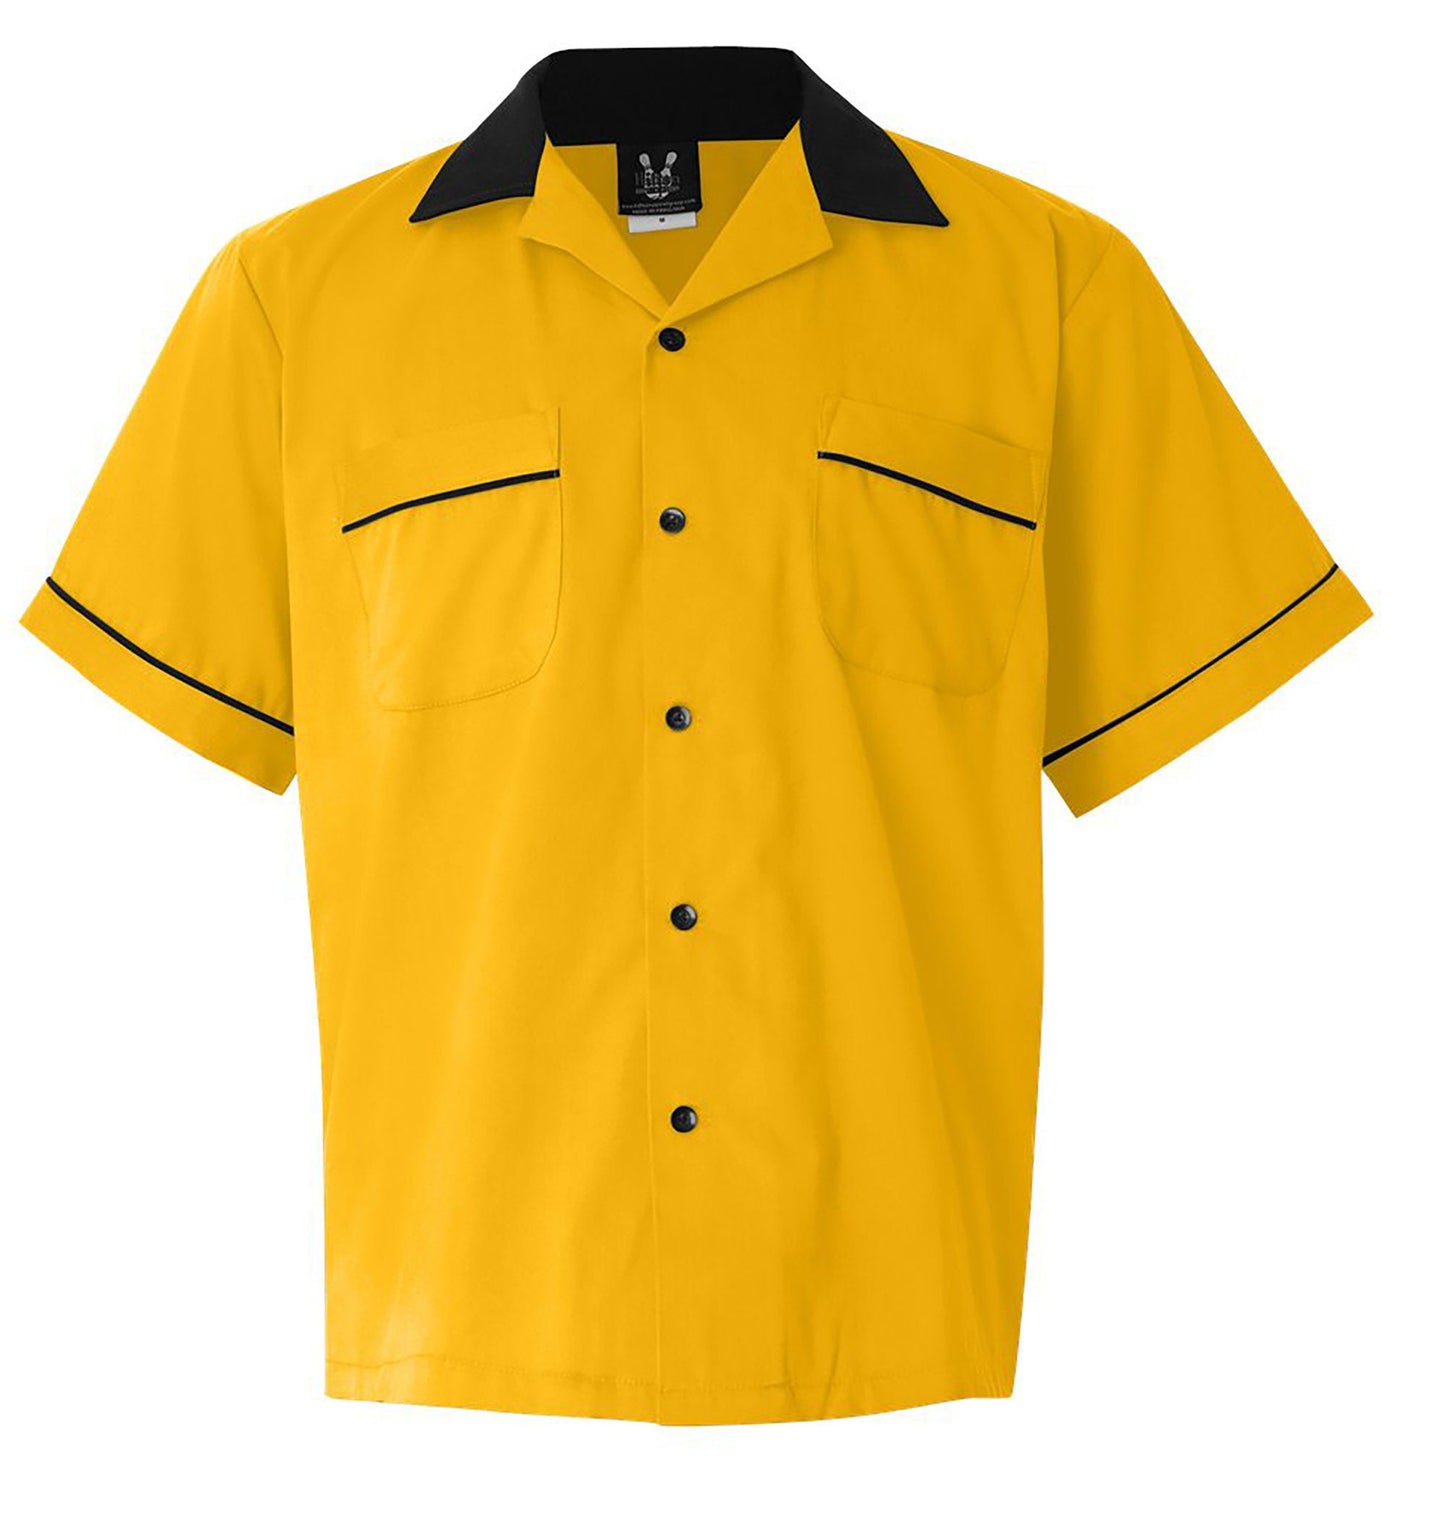 Airmans's Club - Classic Retro Gold and Black Bowling Shirt - Classic size XL ONLY    - Includes Embroidered Name #117